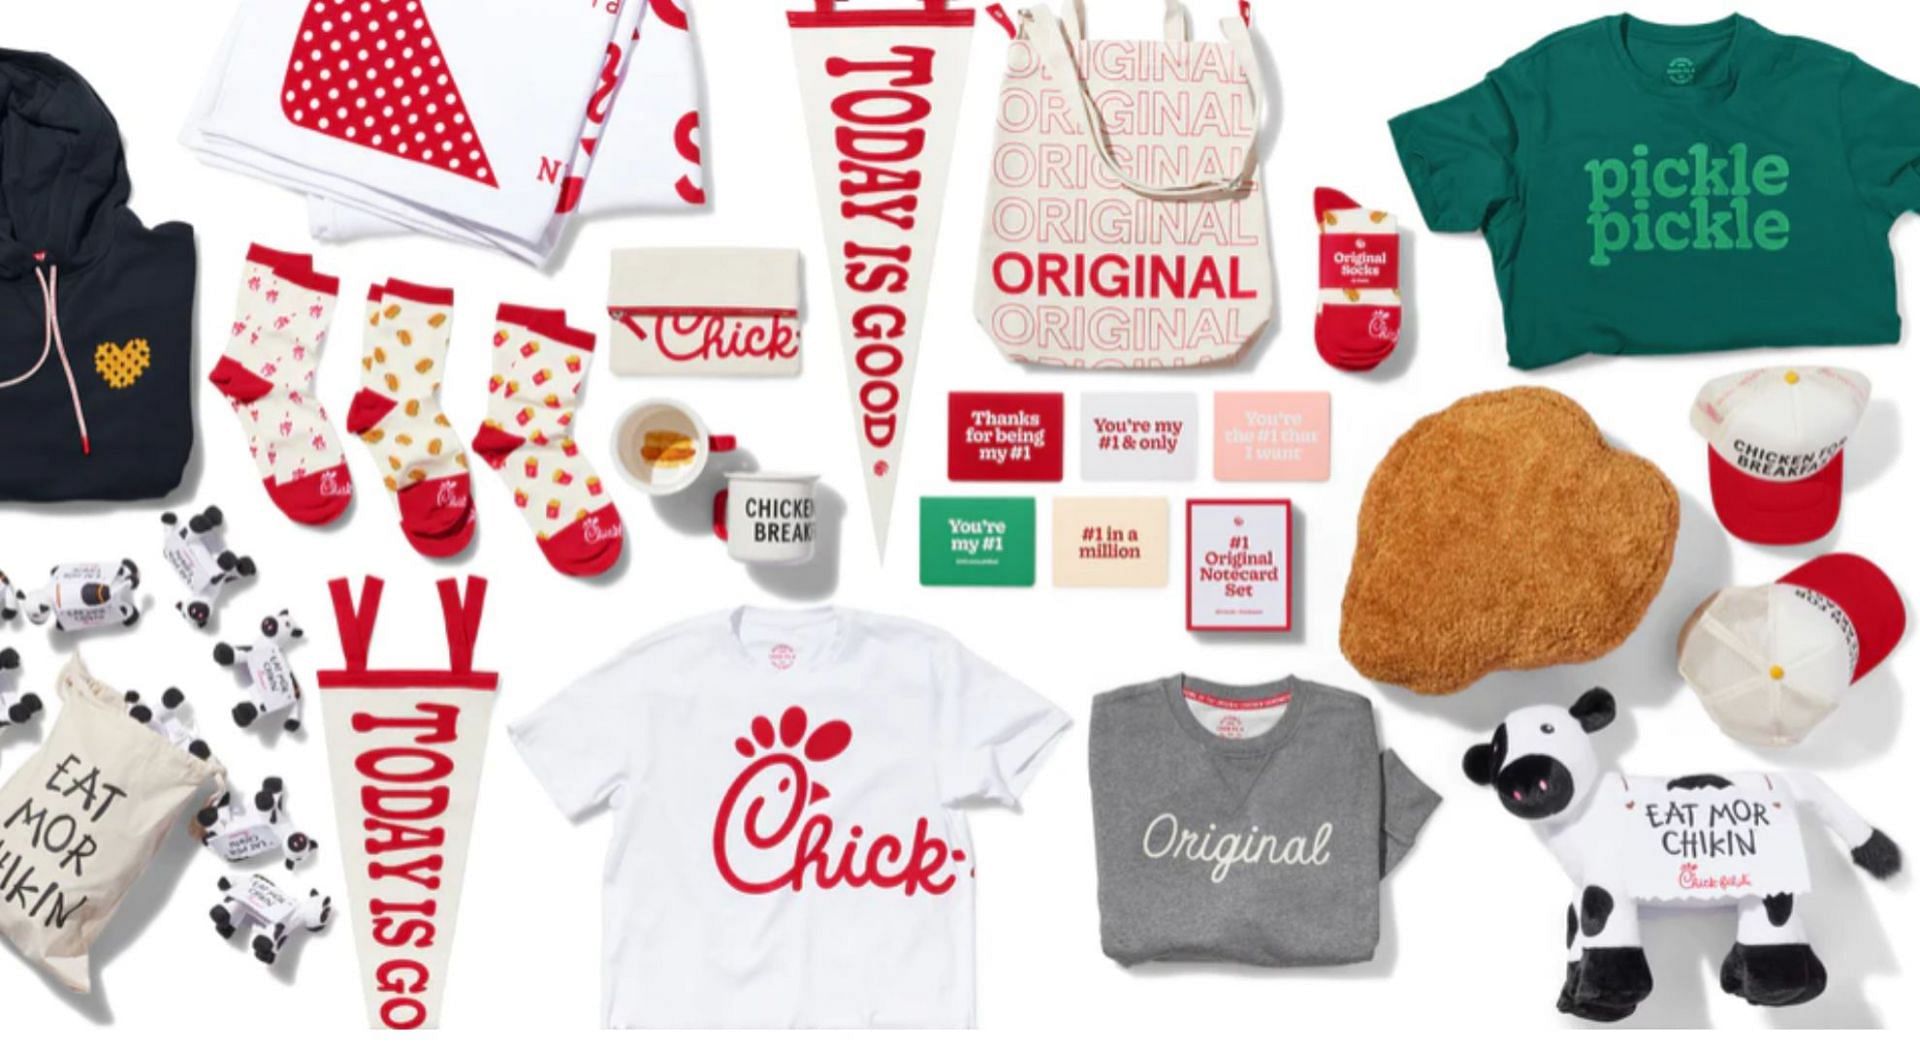 promotional image for Chick-fil-A merchandise (Image via Chick-fil-A)